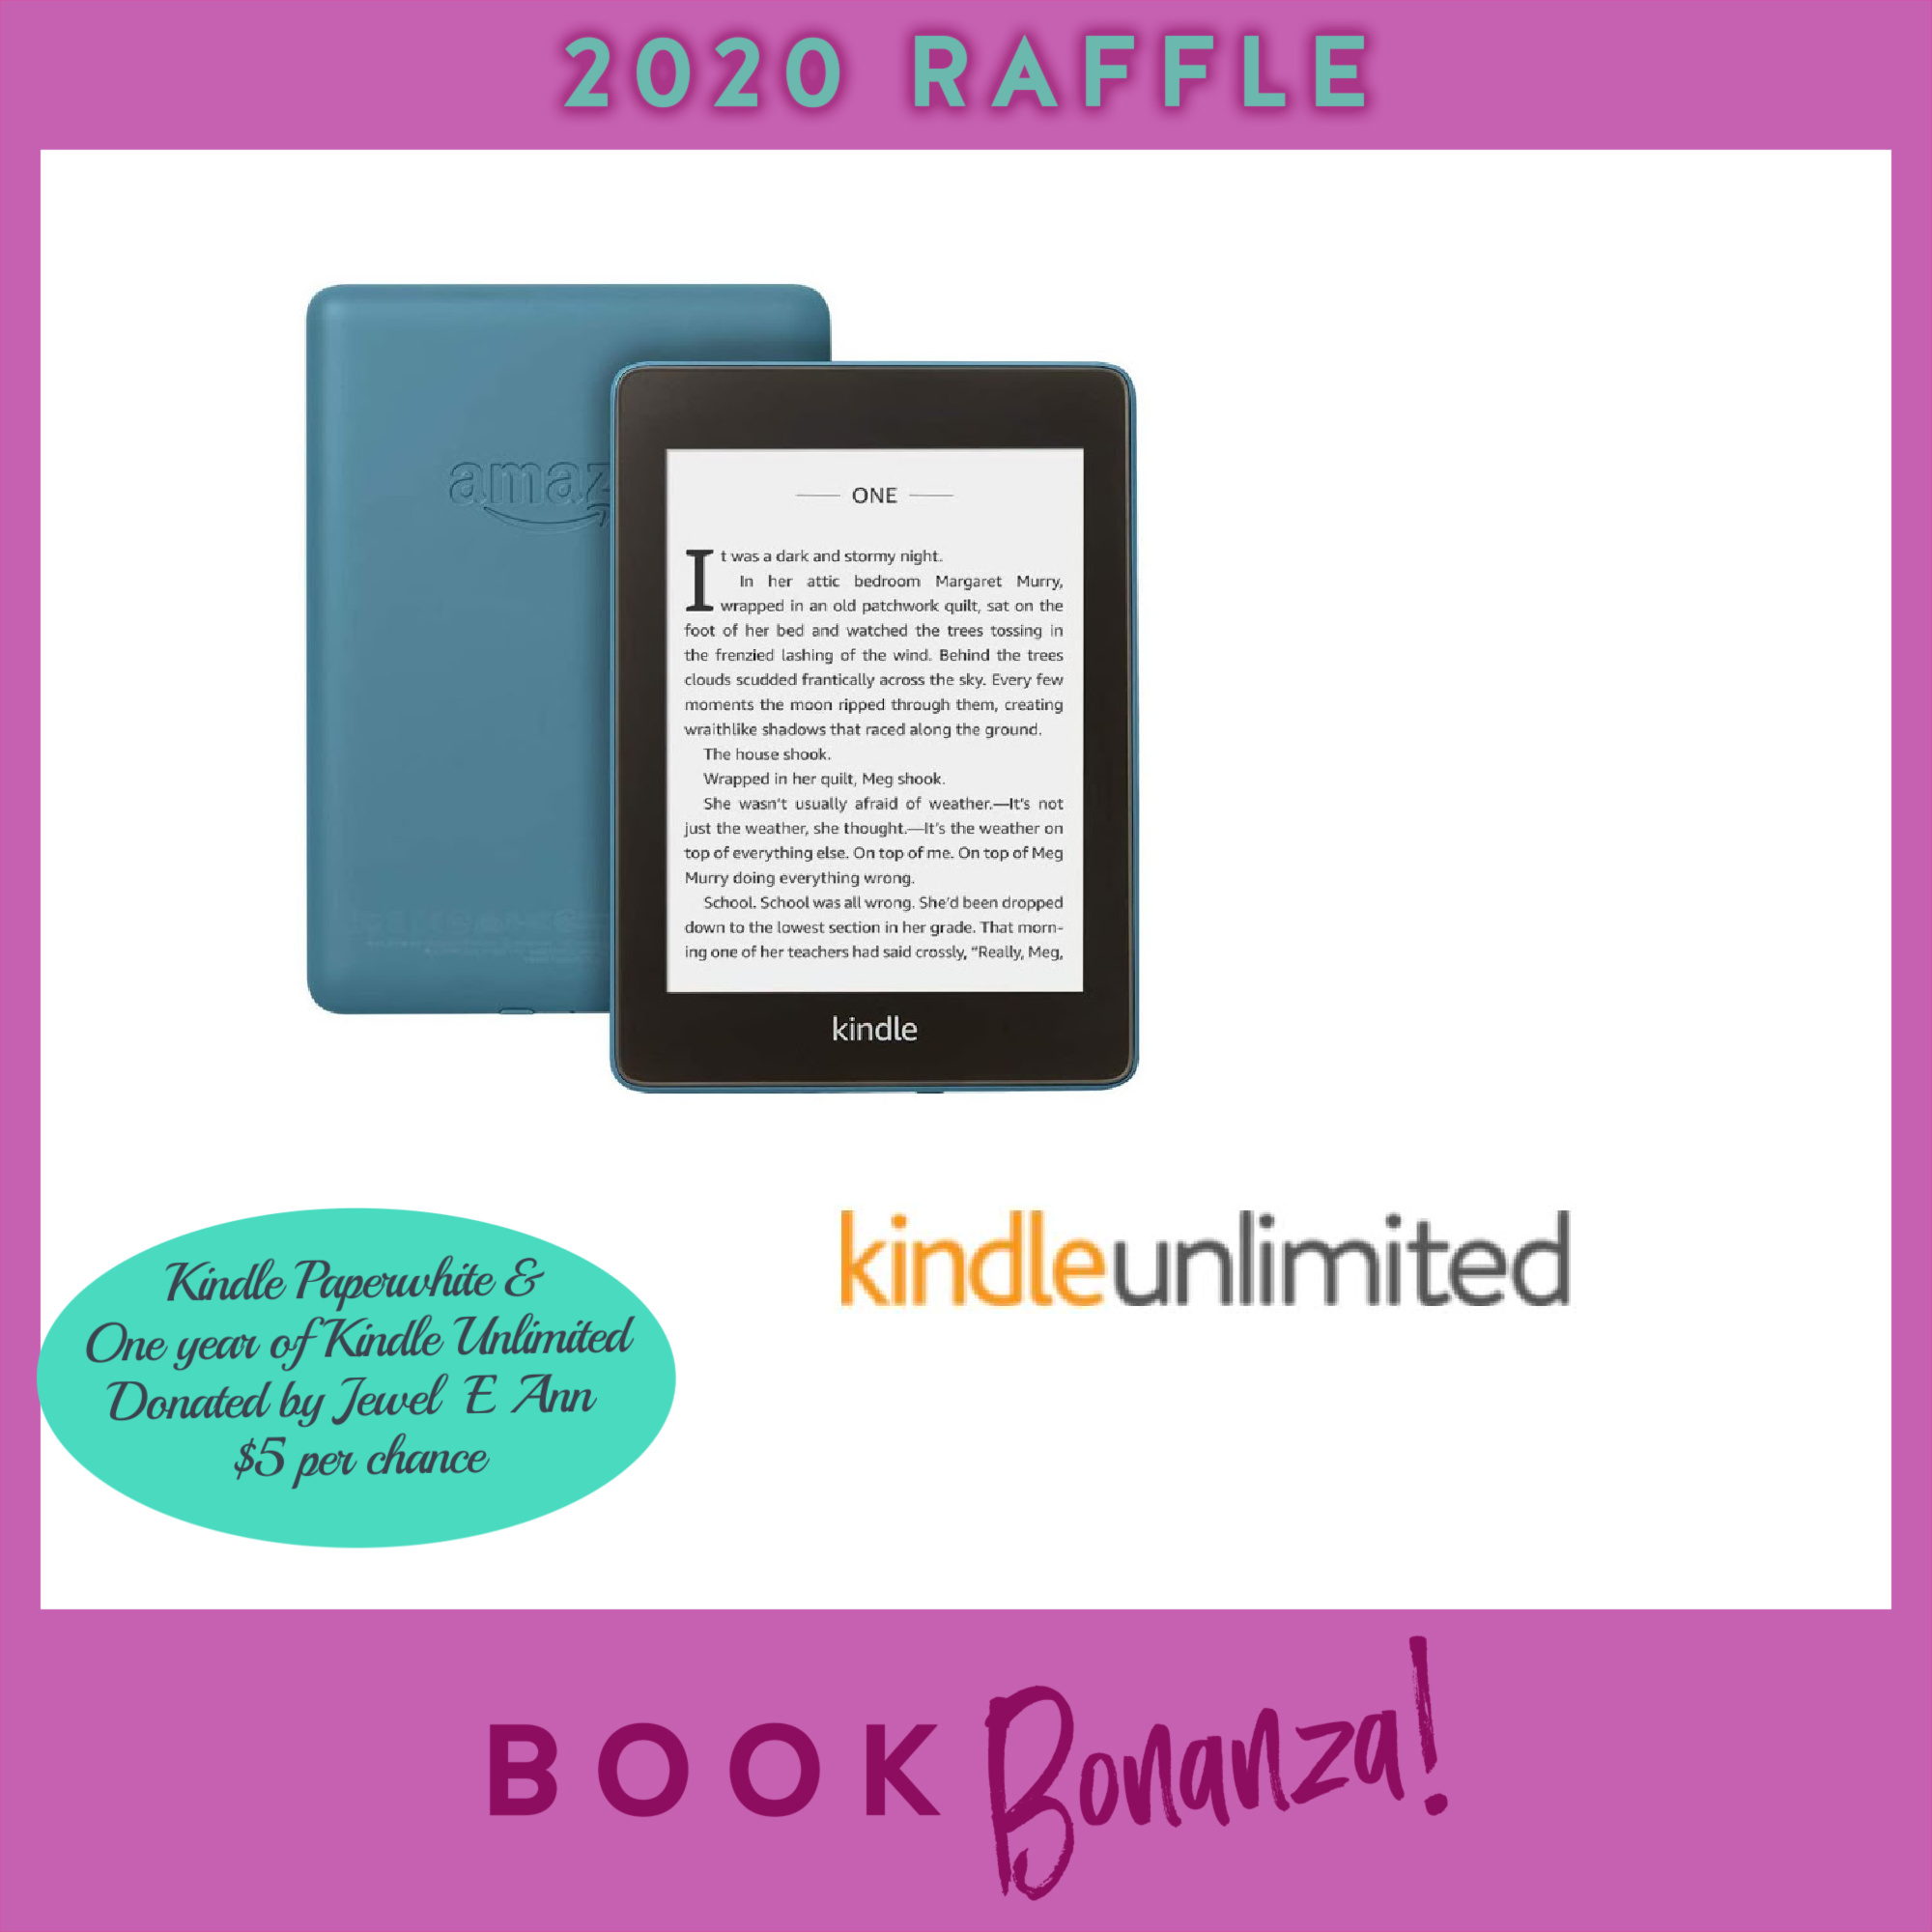 Kindle Paperwhite E Reader 32 GB & One year of Kindle ...